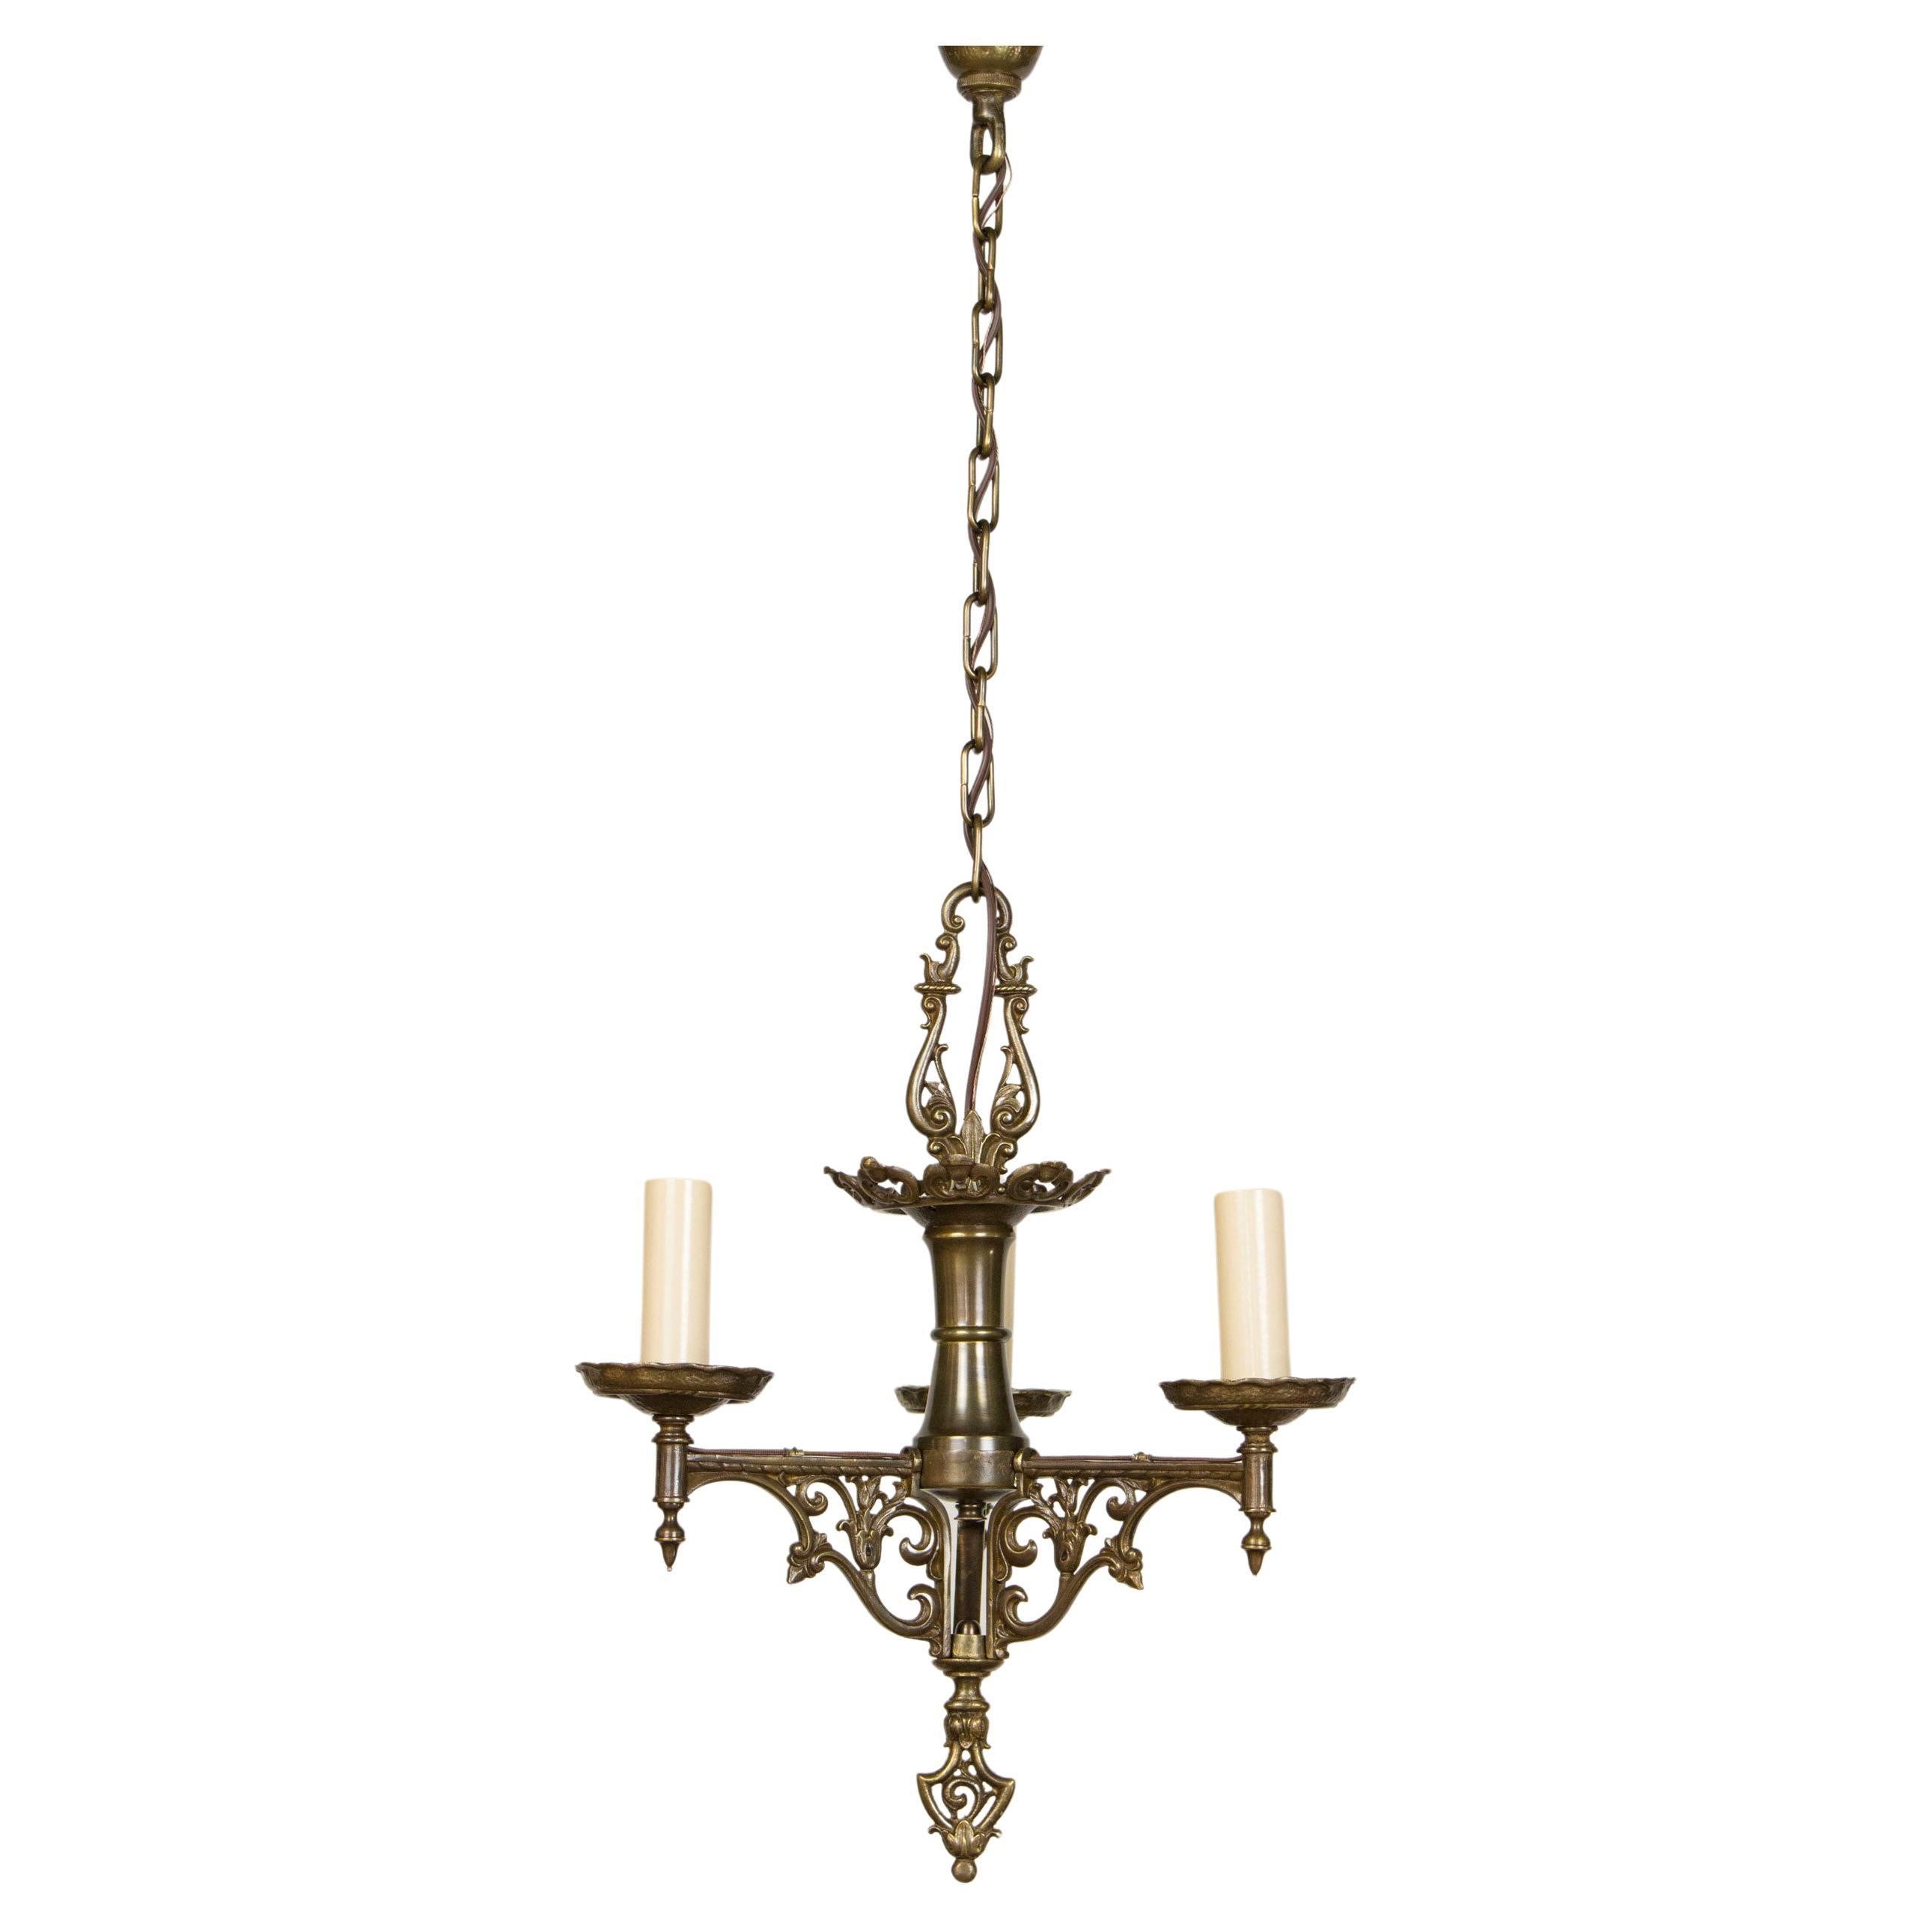 Early 20th Century Three Arm Spanish Revival Brass Chandelier